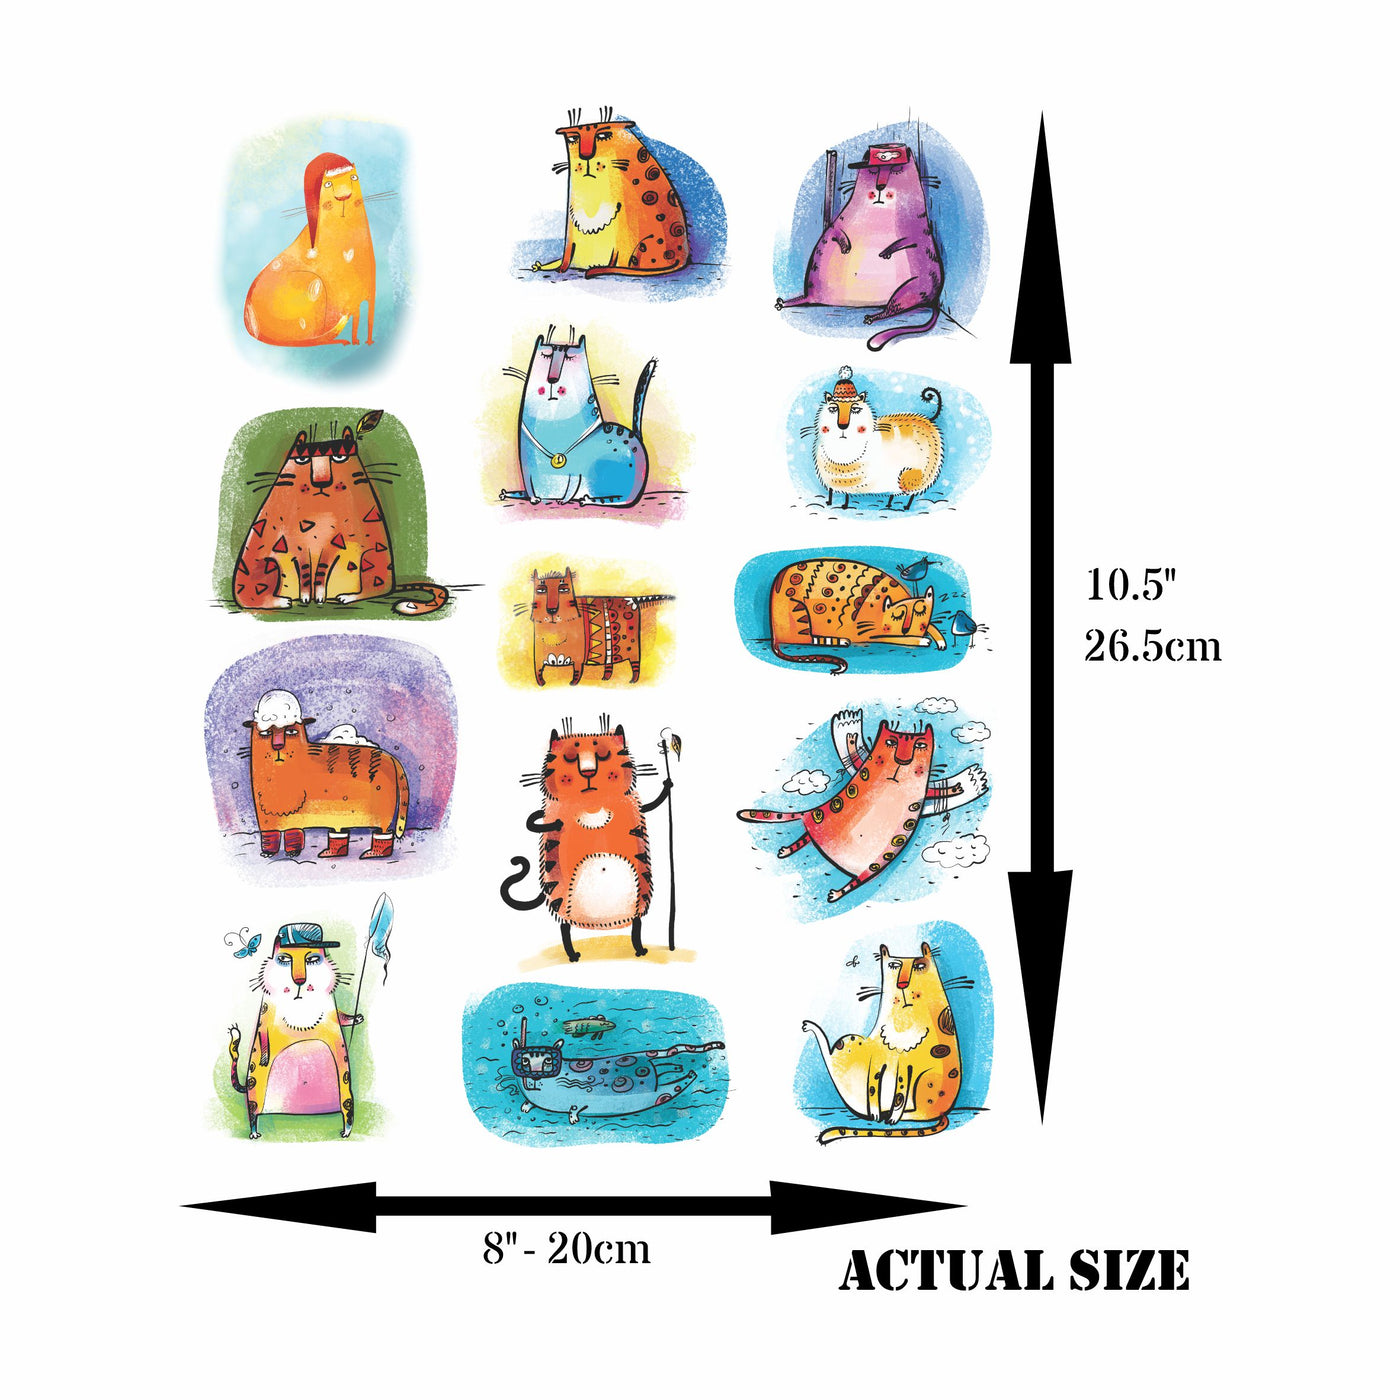 Cartoon Animals Rice Paper, 8 x 10.5 inch - for Decoupage Furniture Crafts